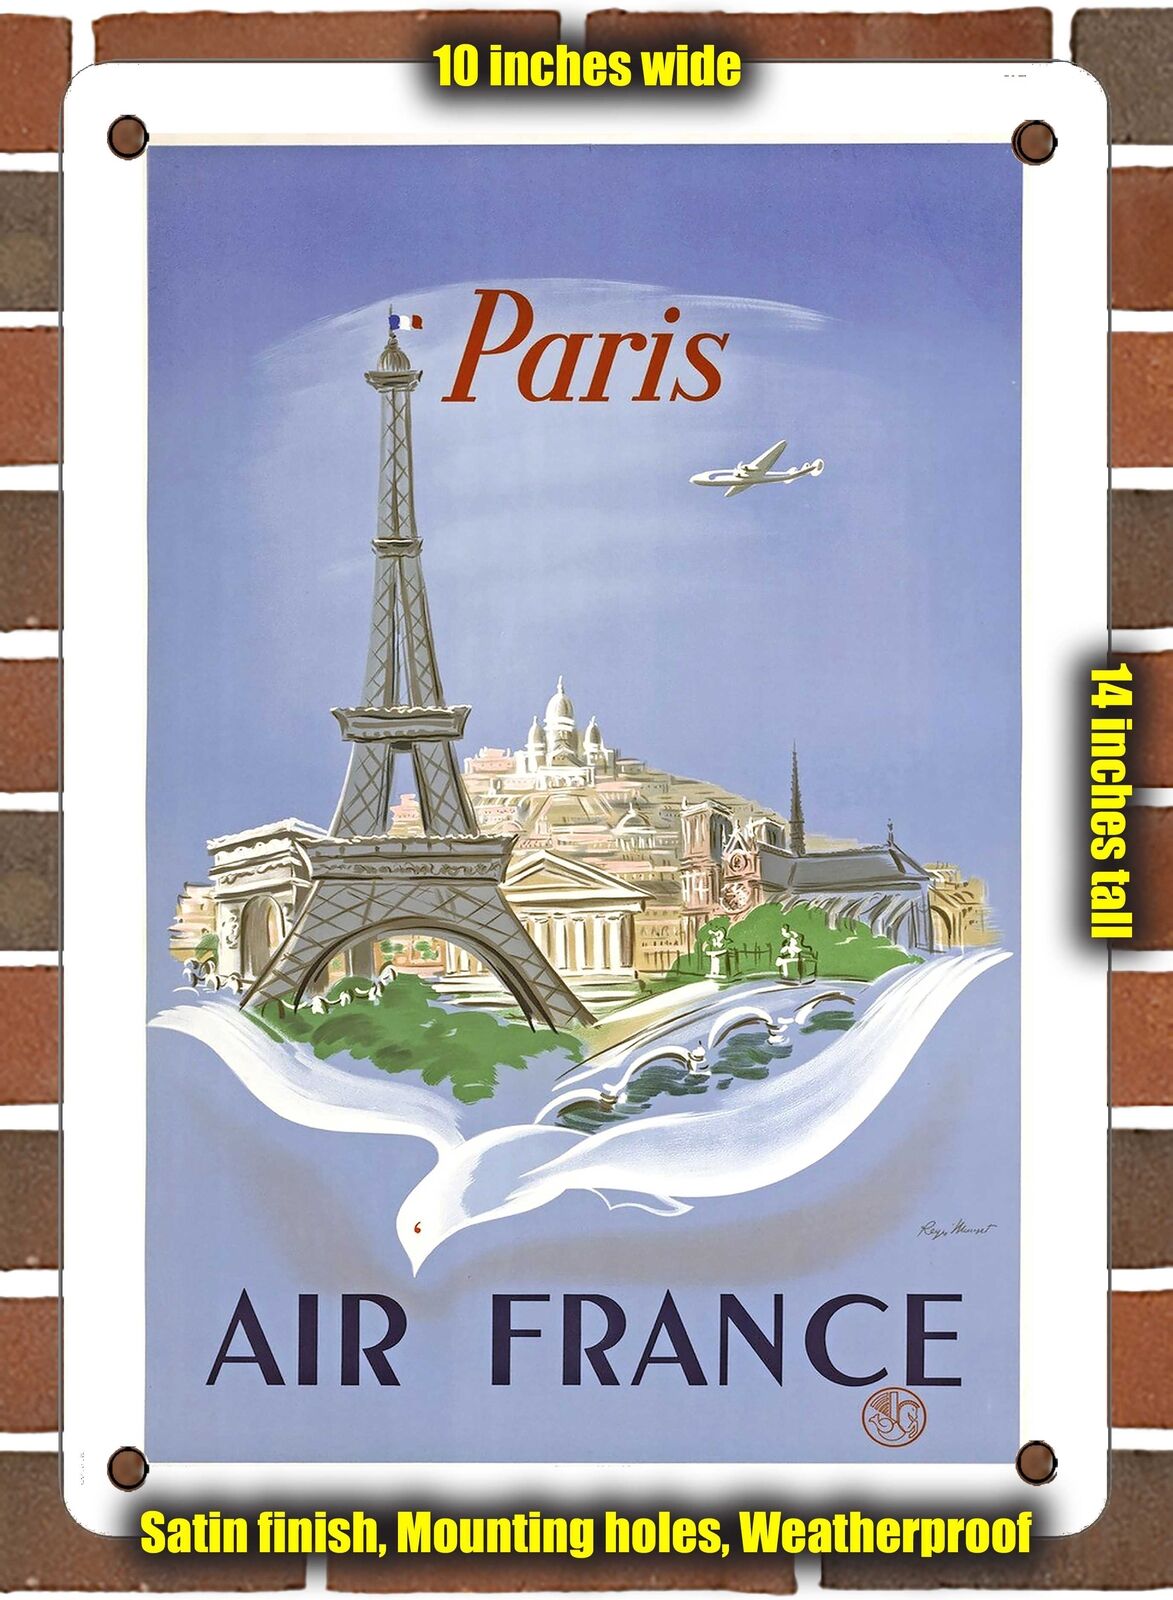 METAL SIGN - 1952 Paris French Airline - 10x14 Inches